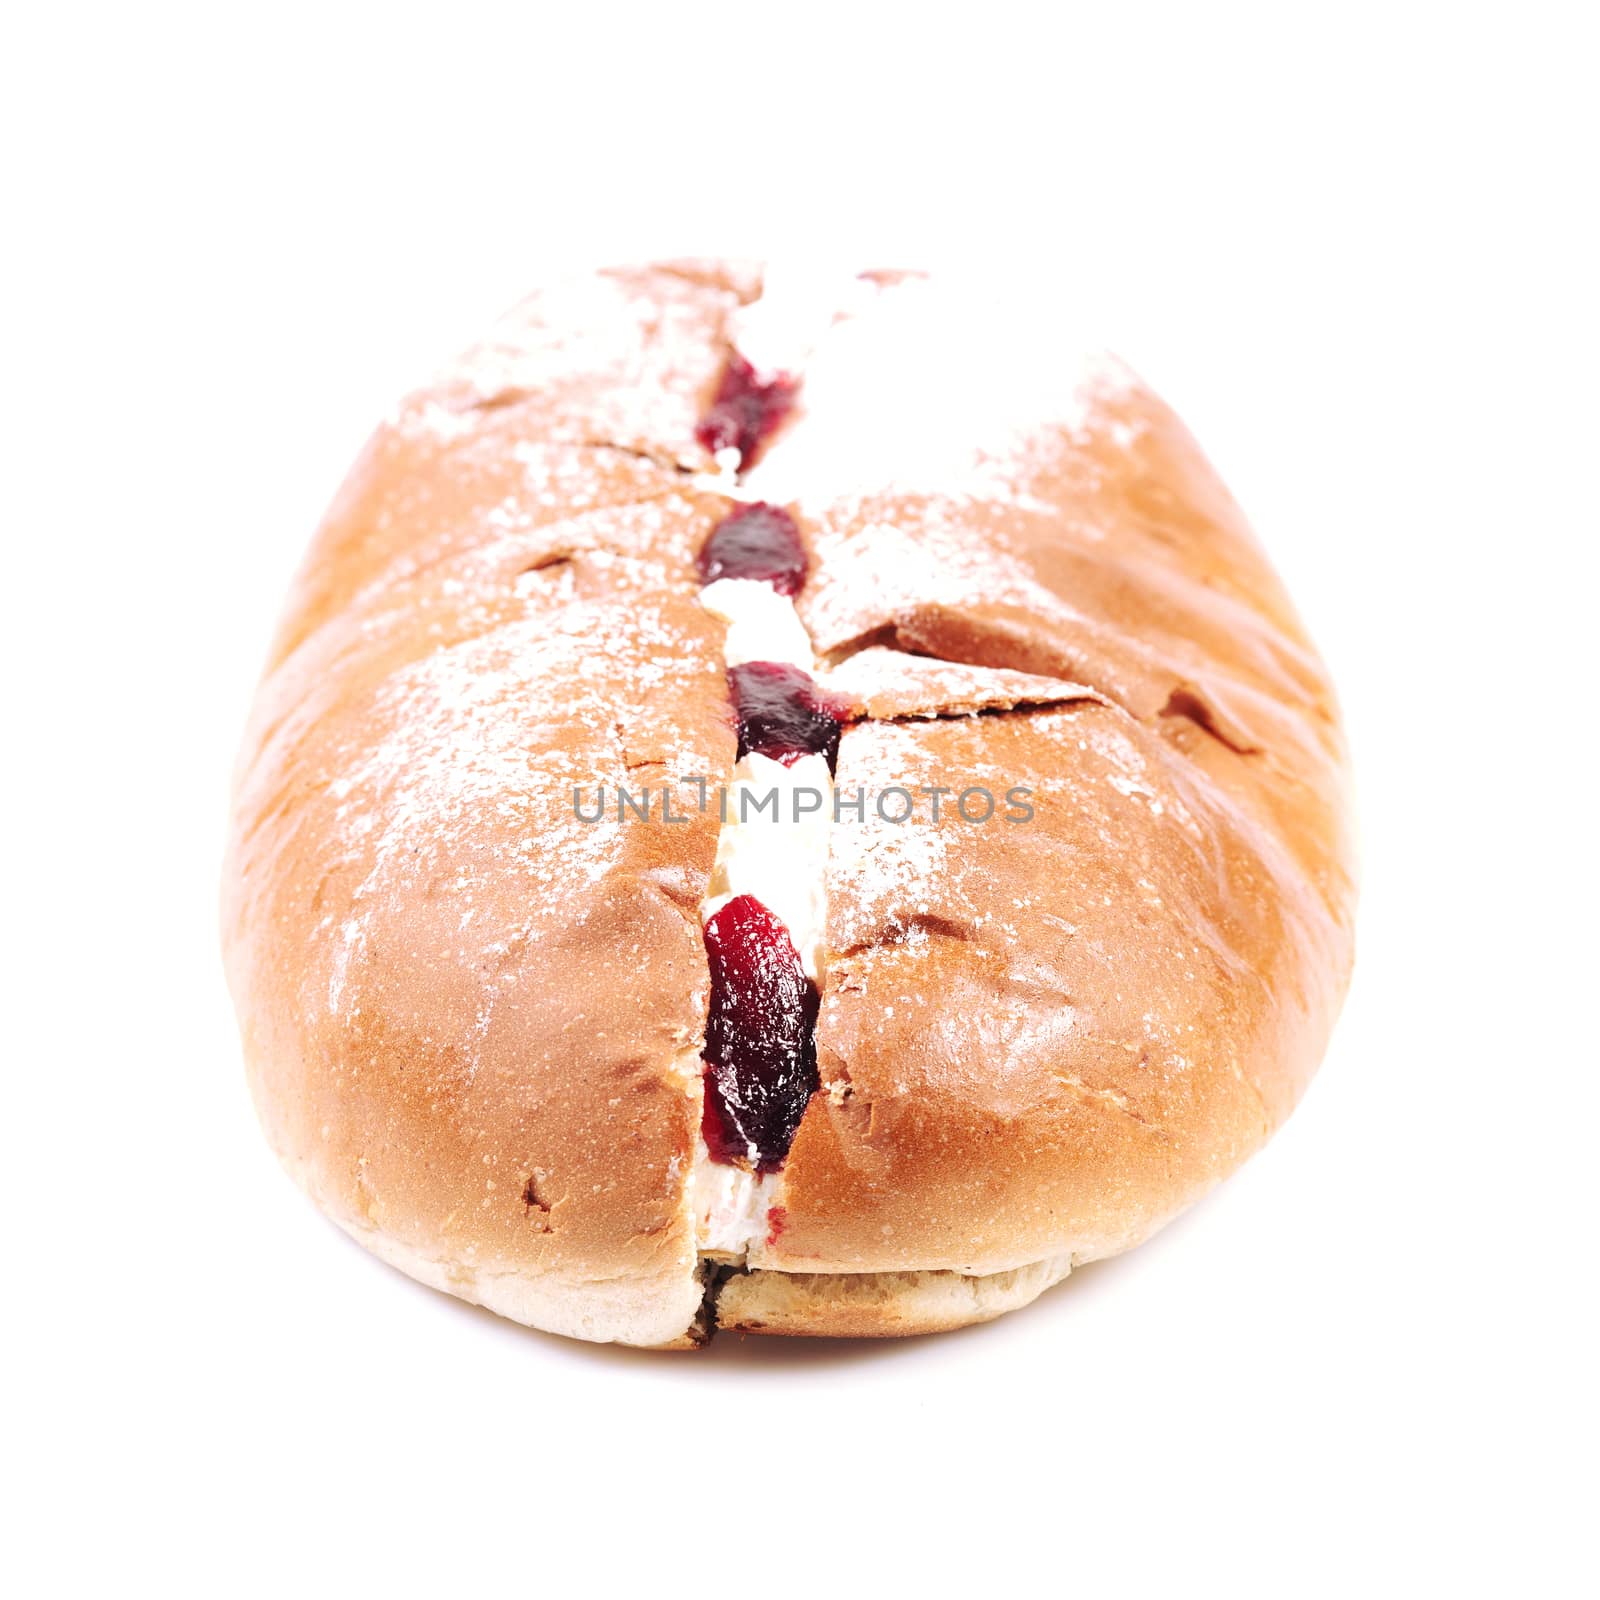 Raspberry jam and cream pastry on a white background